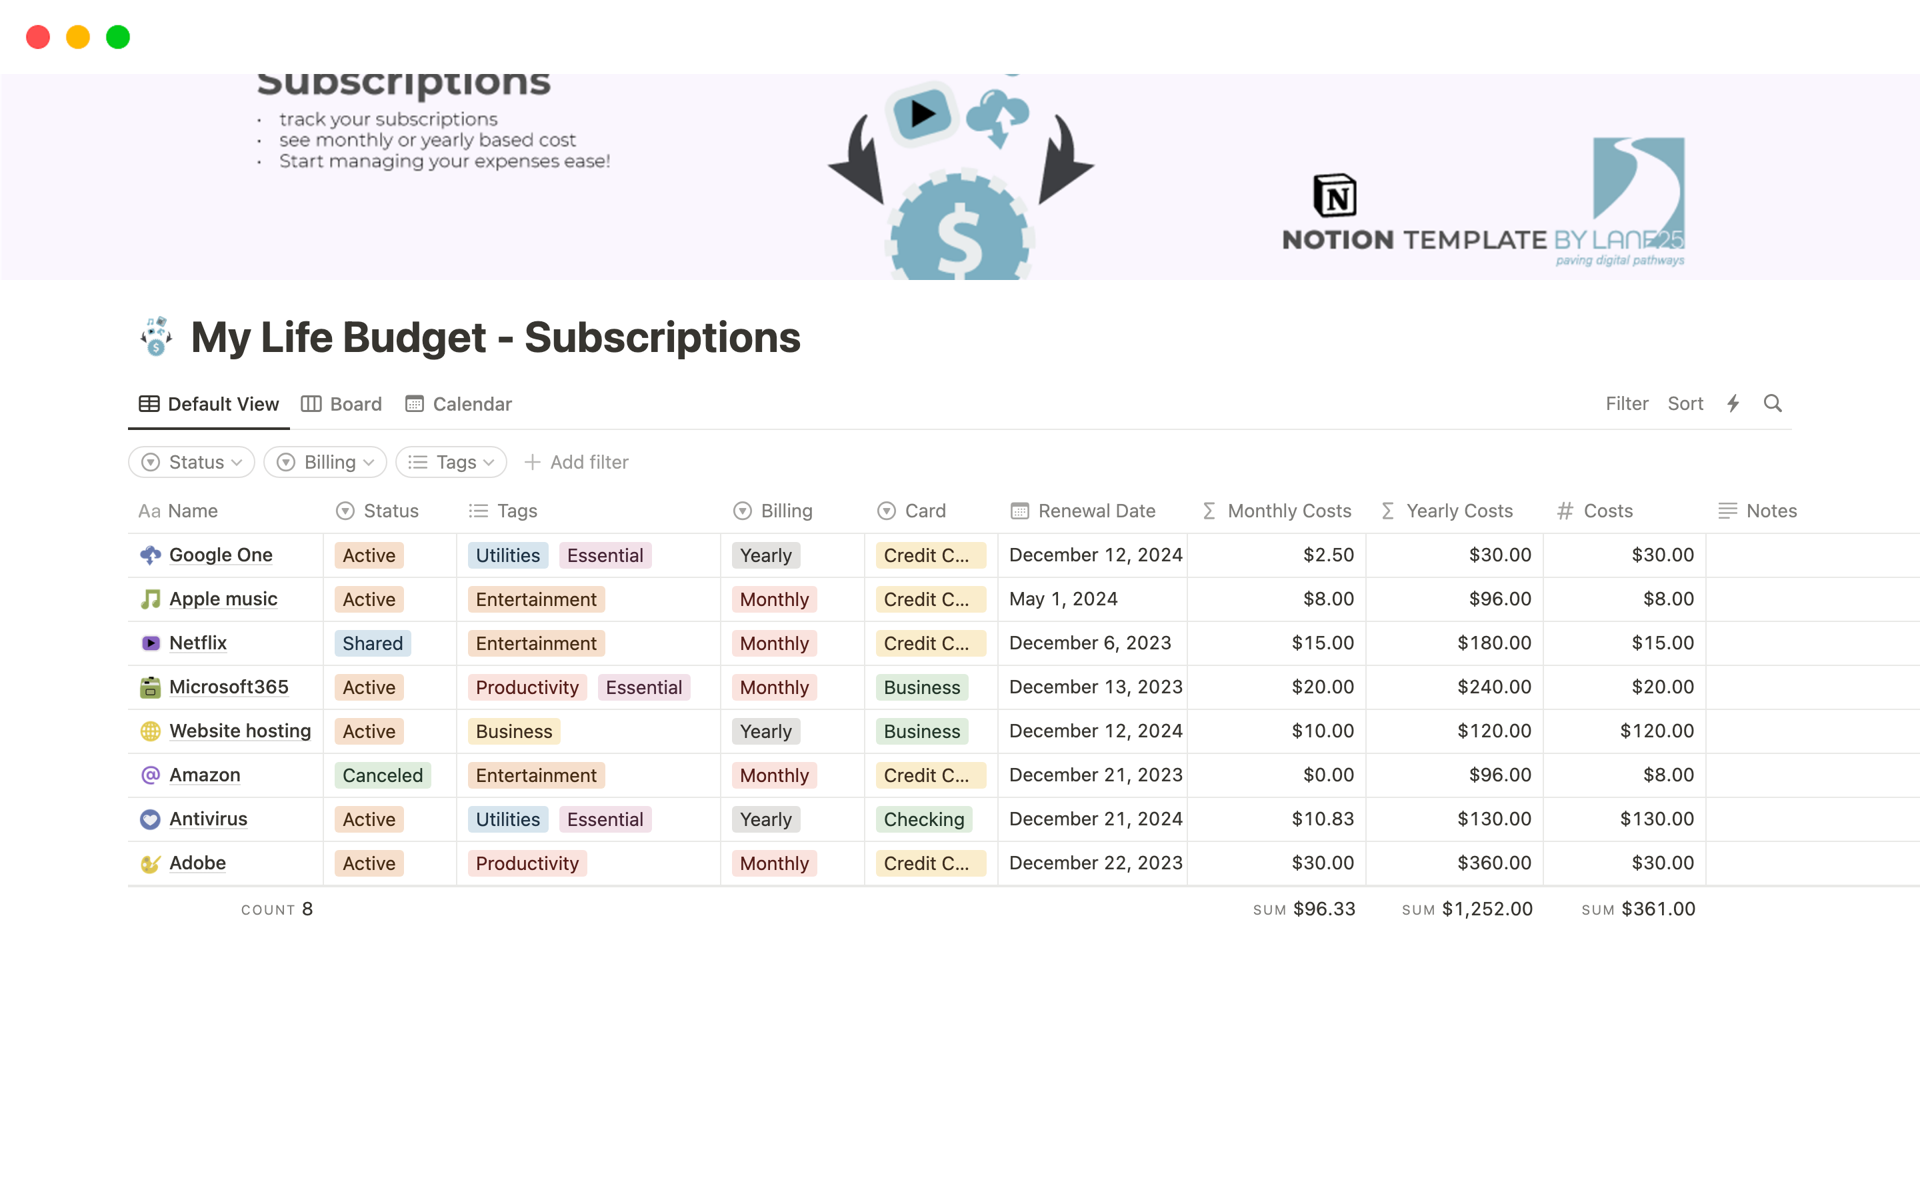 Track your subscriptions, see monthly or yearly based cost and start managing your expenses ease!